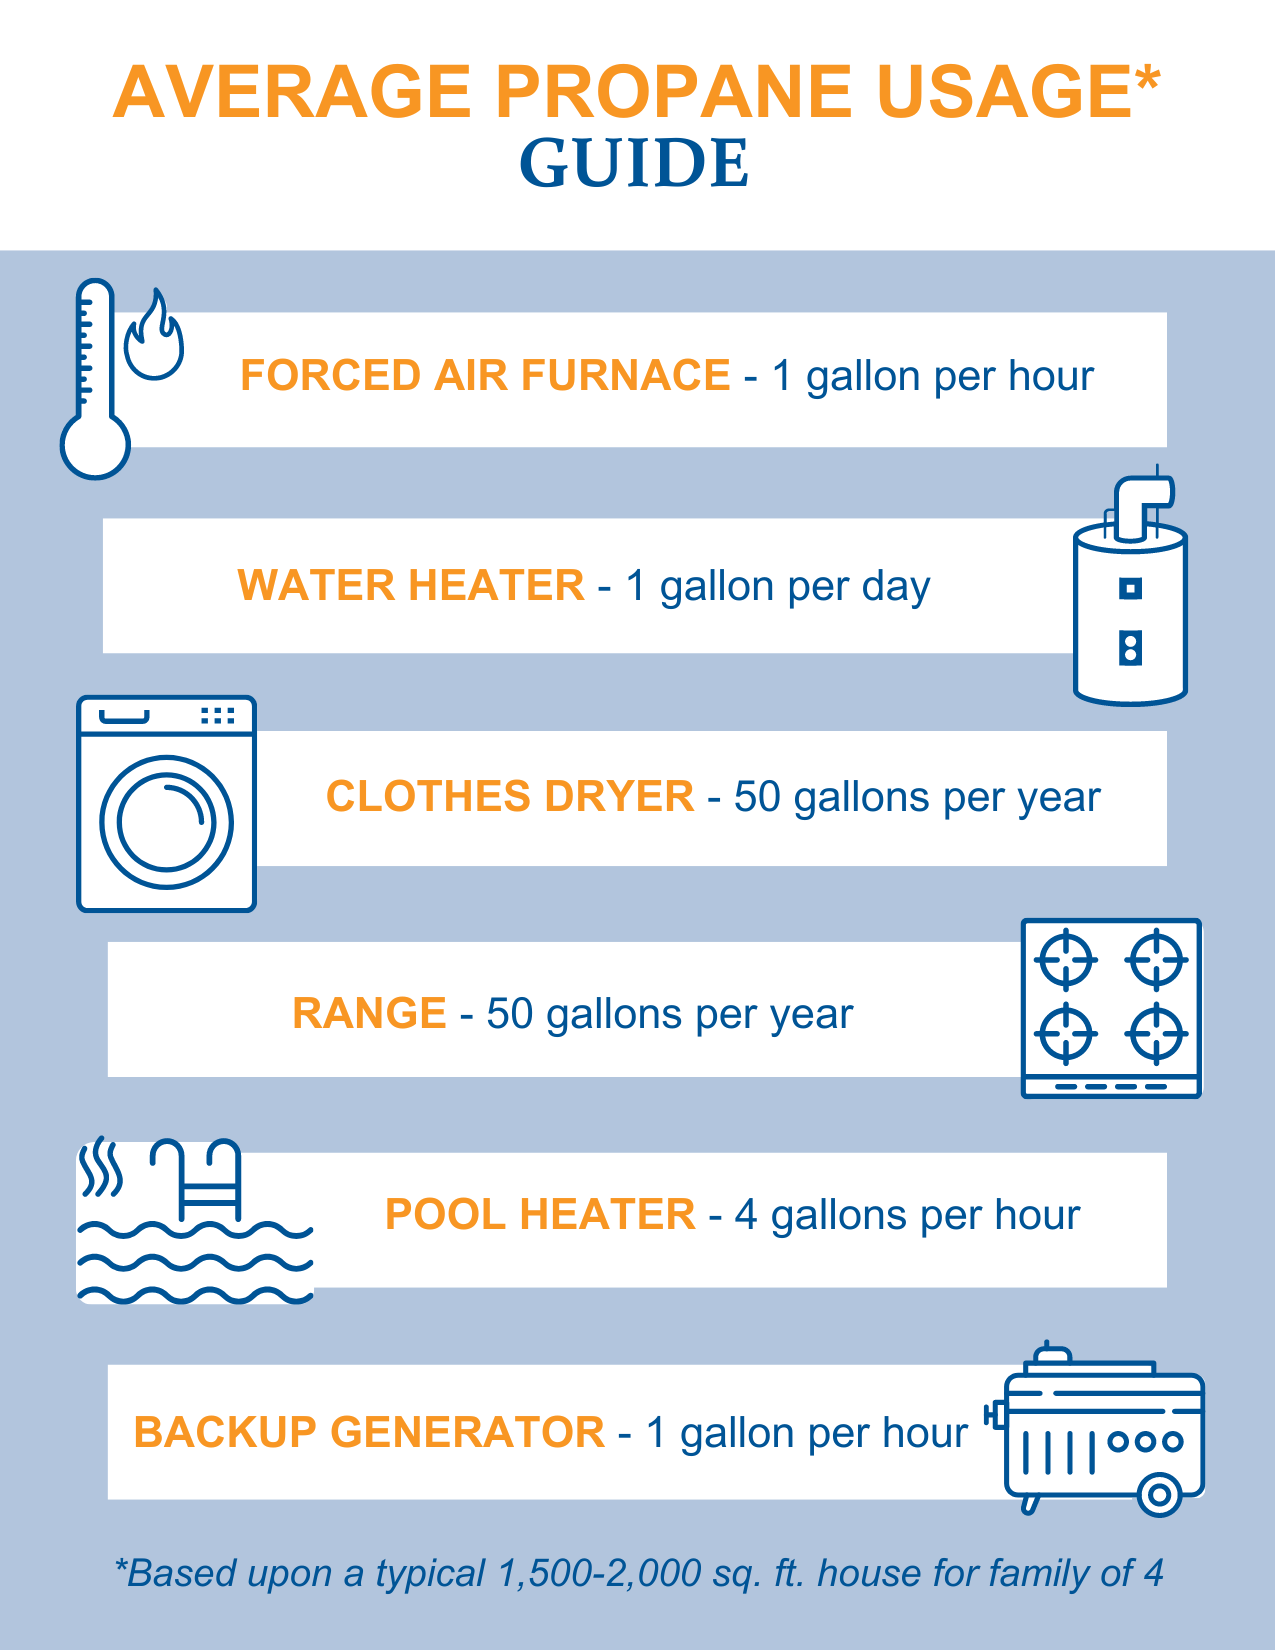 average propane usage guide for residential propane appliances